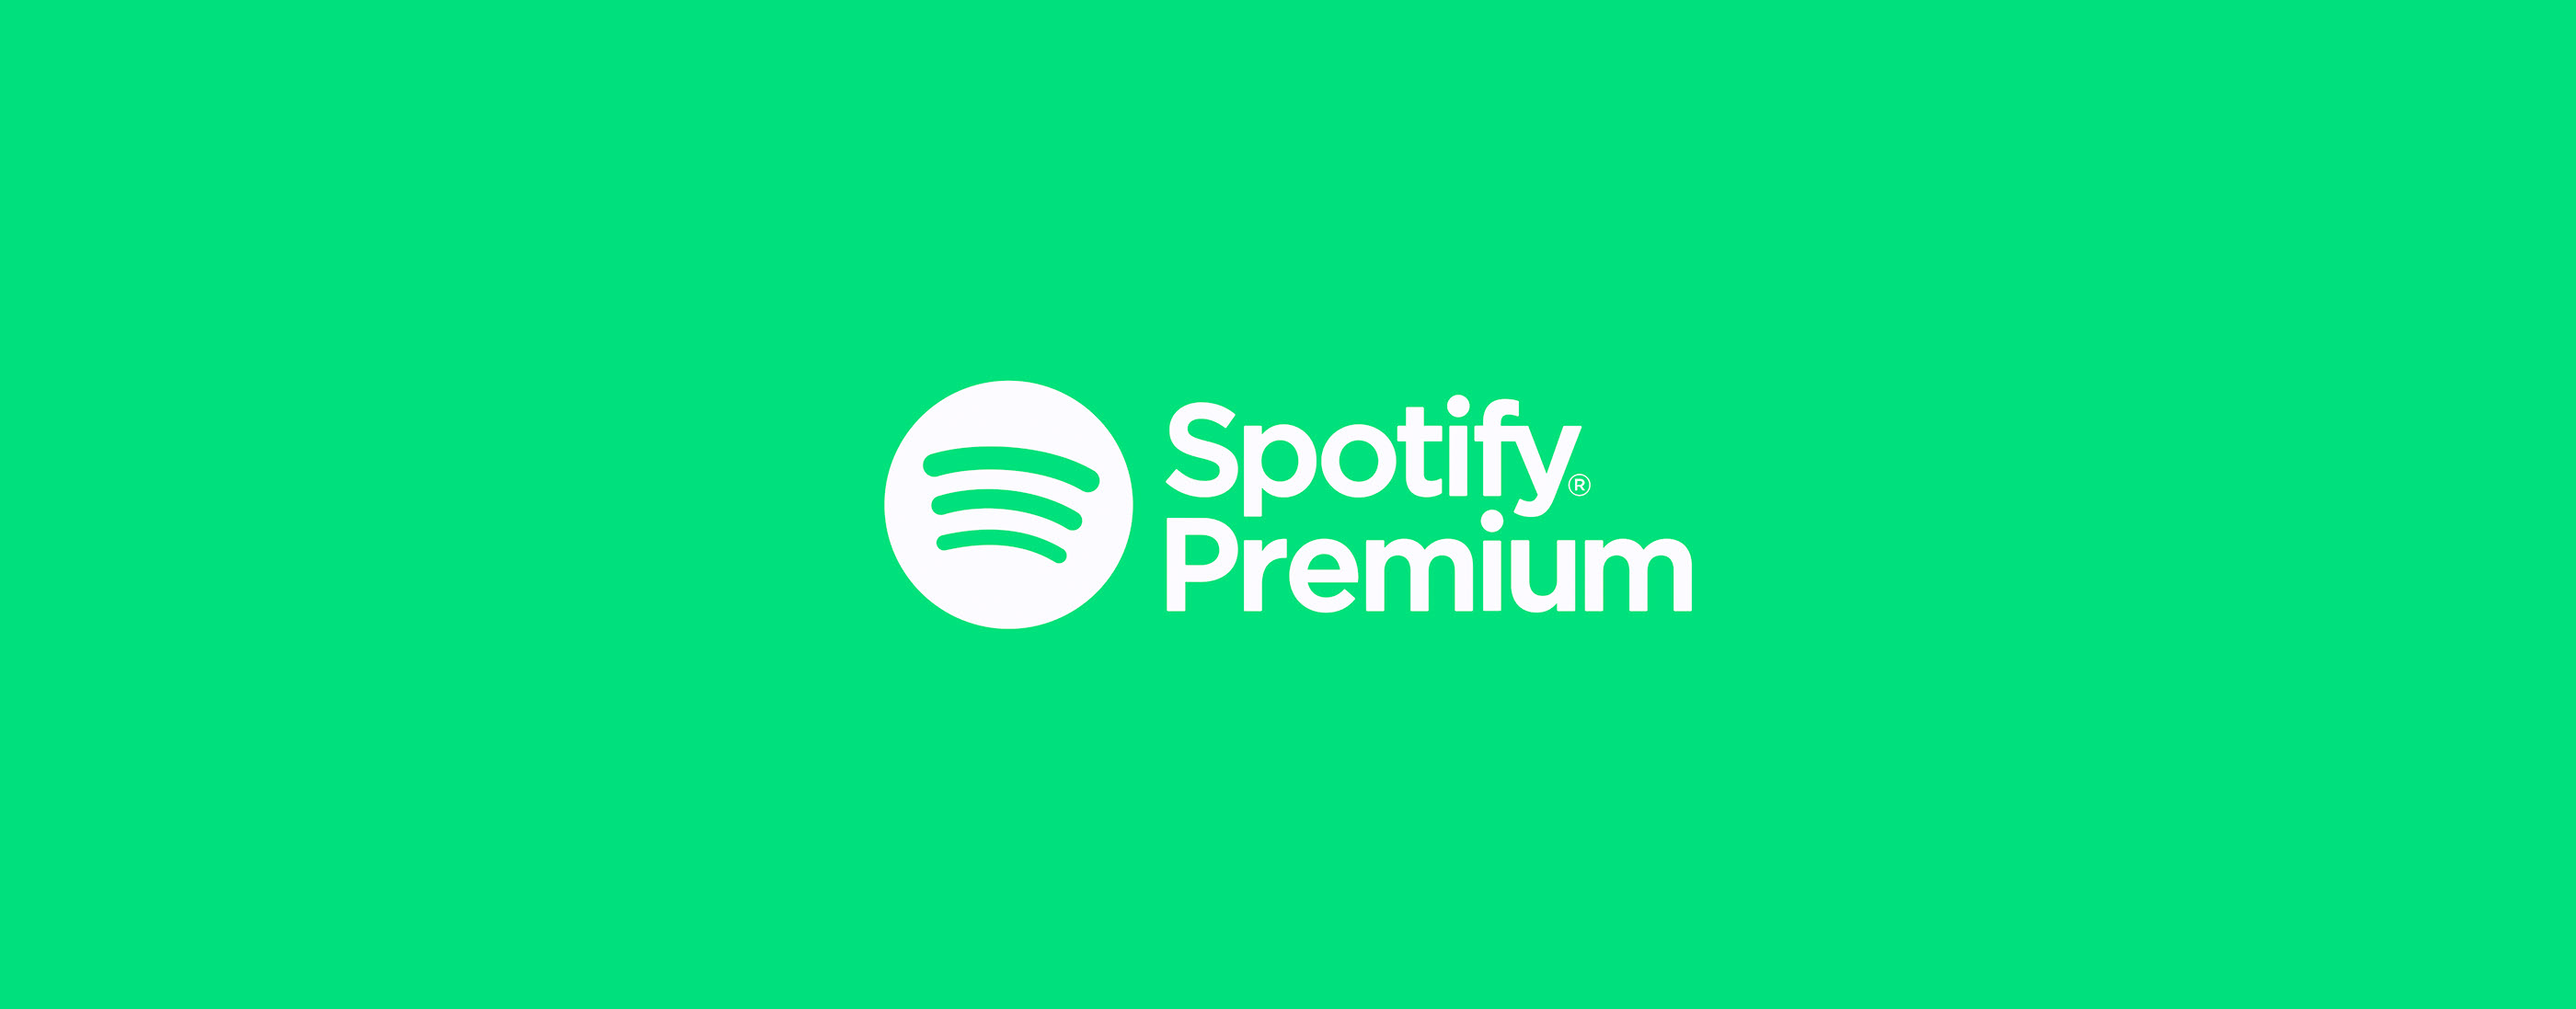 how to add people to spotify family